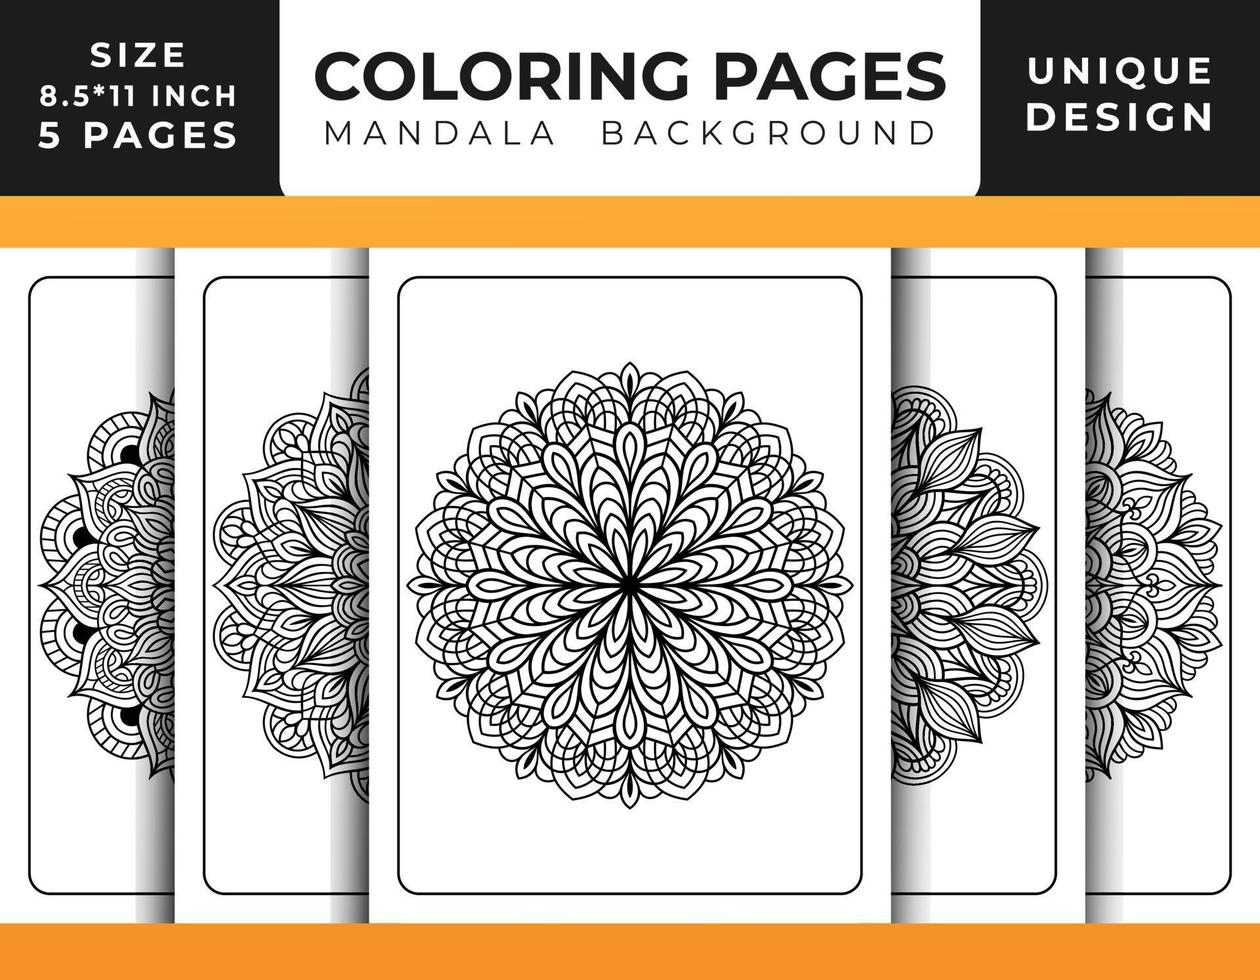 Mandala floral pattern coloring page for adults relaxation, Coloring pages mandala background, Black and white mandala coloring pages, mandala hand drawn outlined line art pattern pro vector